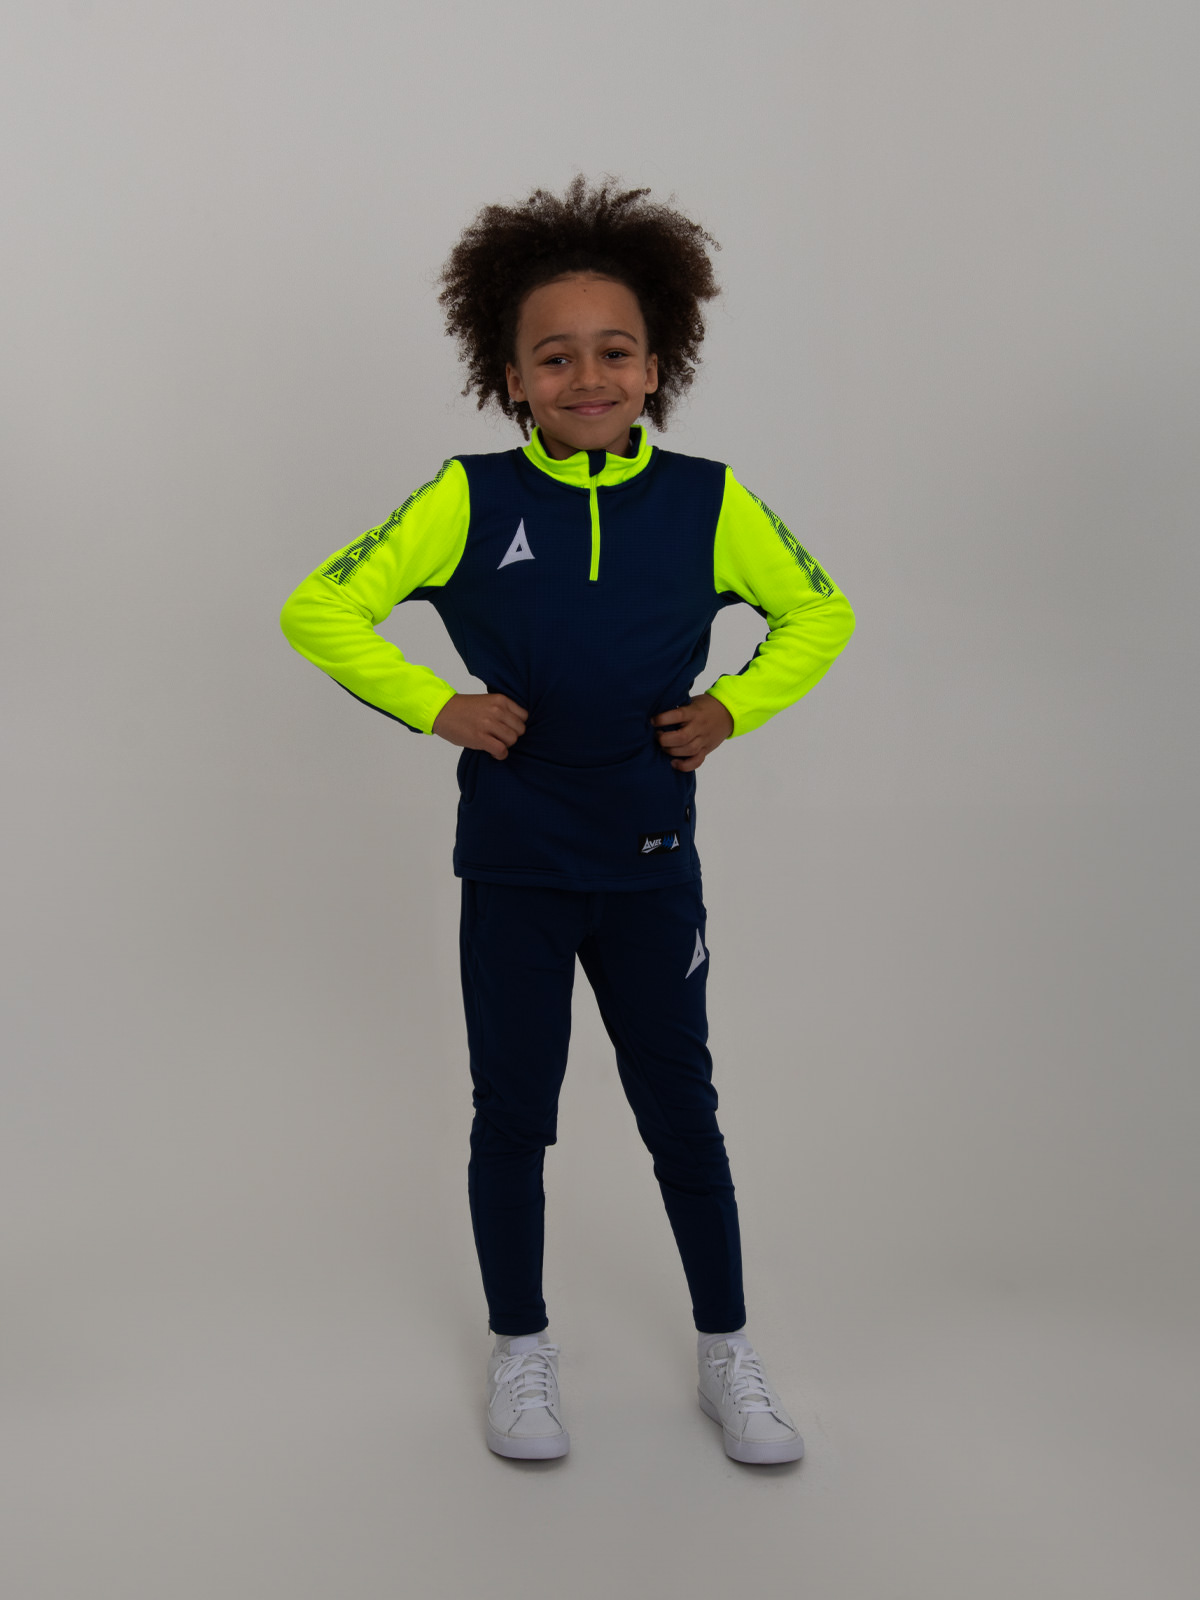 a kid with is hands on his hips wearing a navy blue sweat top with neon yellow sleeves.